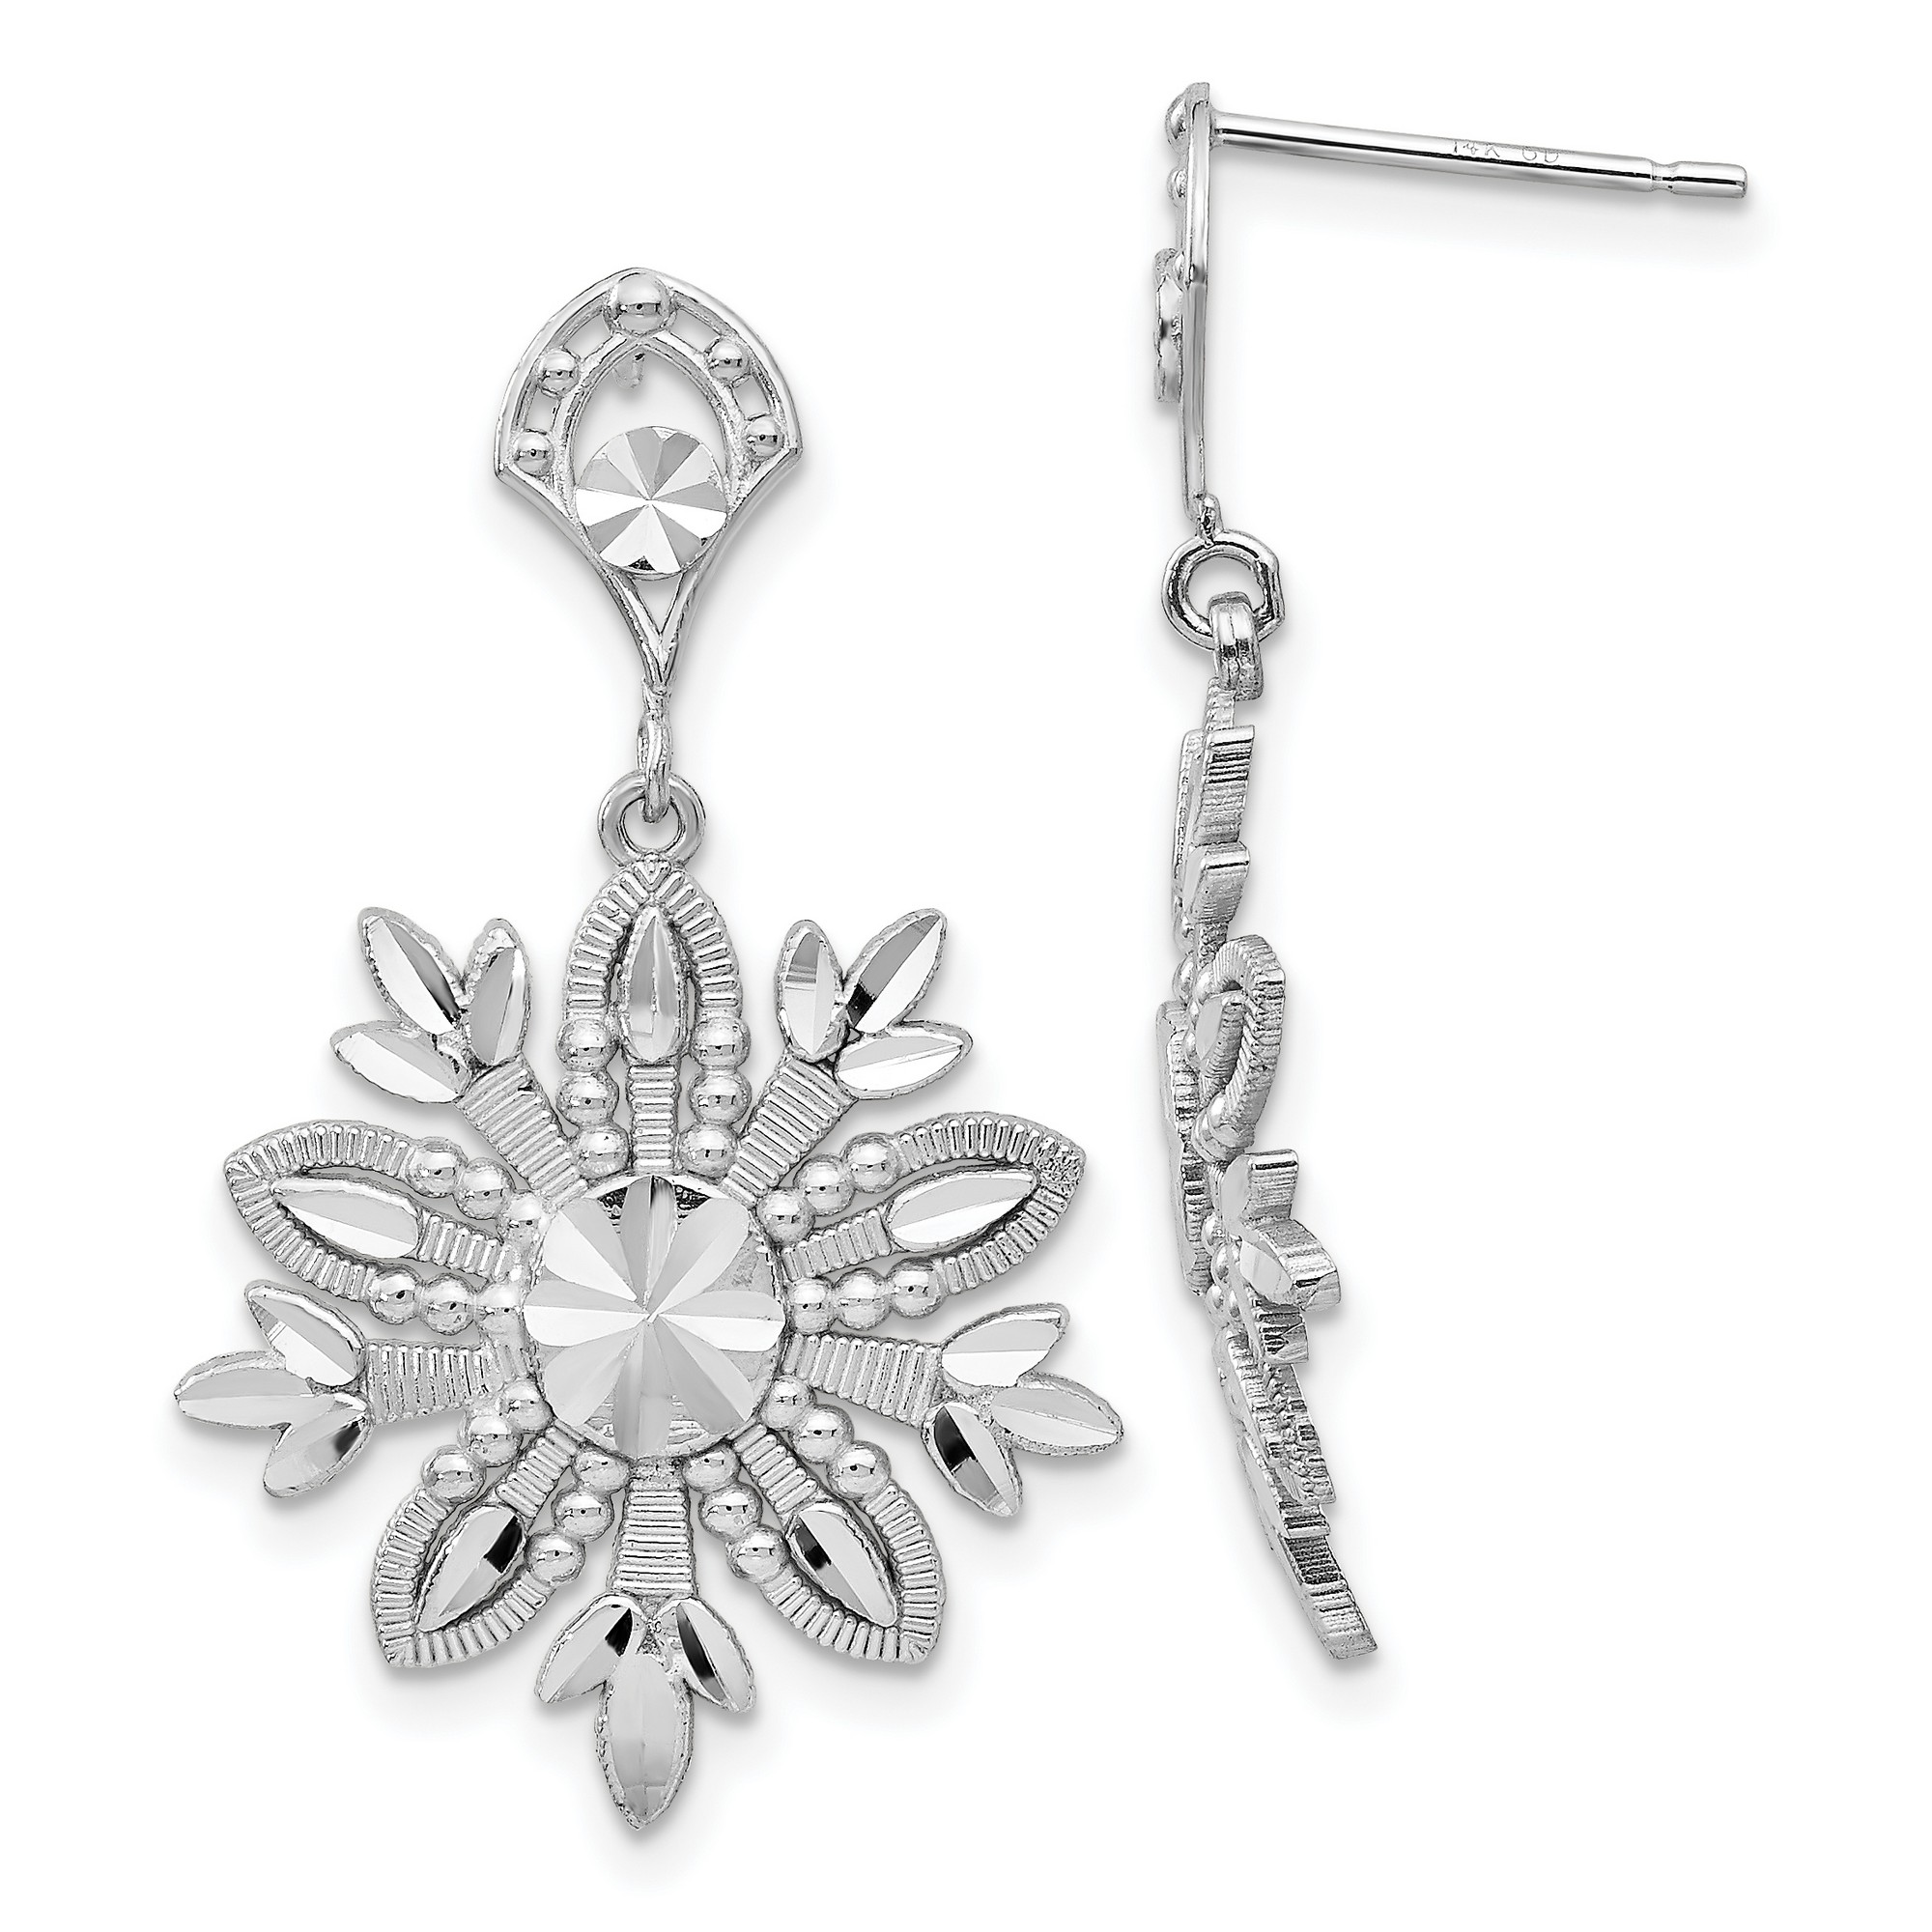 Pre-owned Jewelry Stores Network 14k White Gold Snowflake Dangle Post Earrings 31x18 Mm